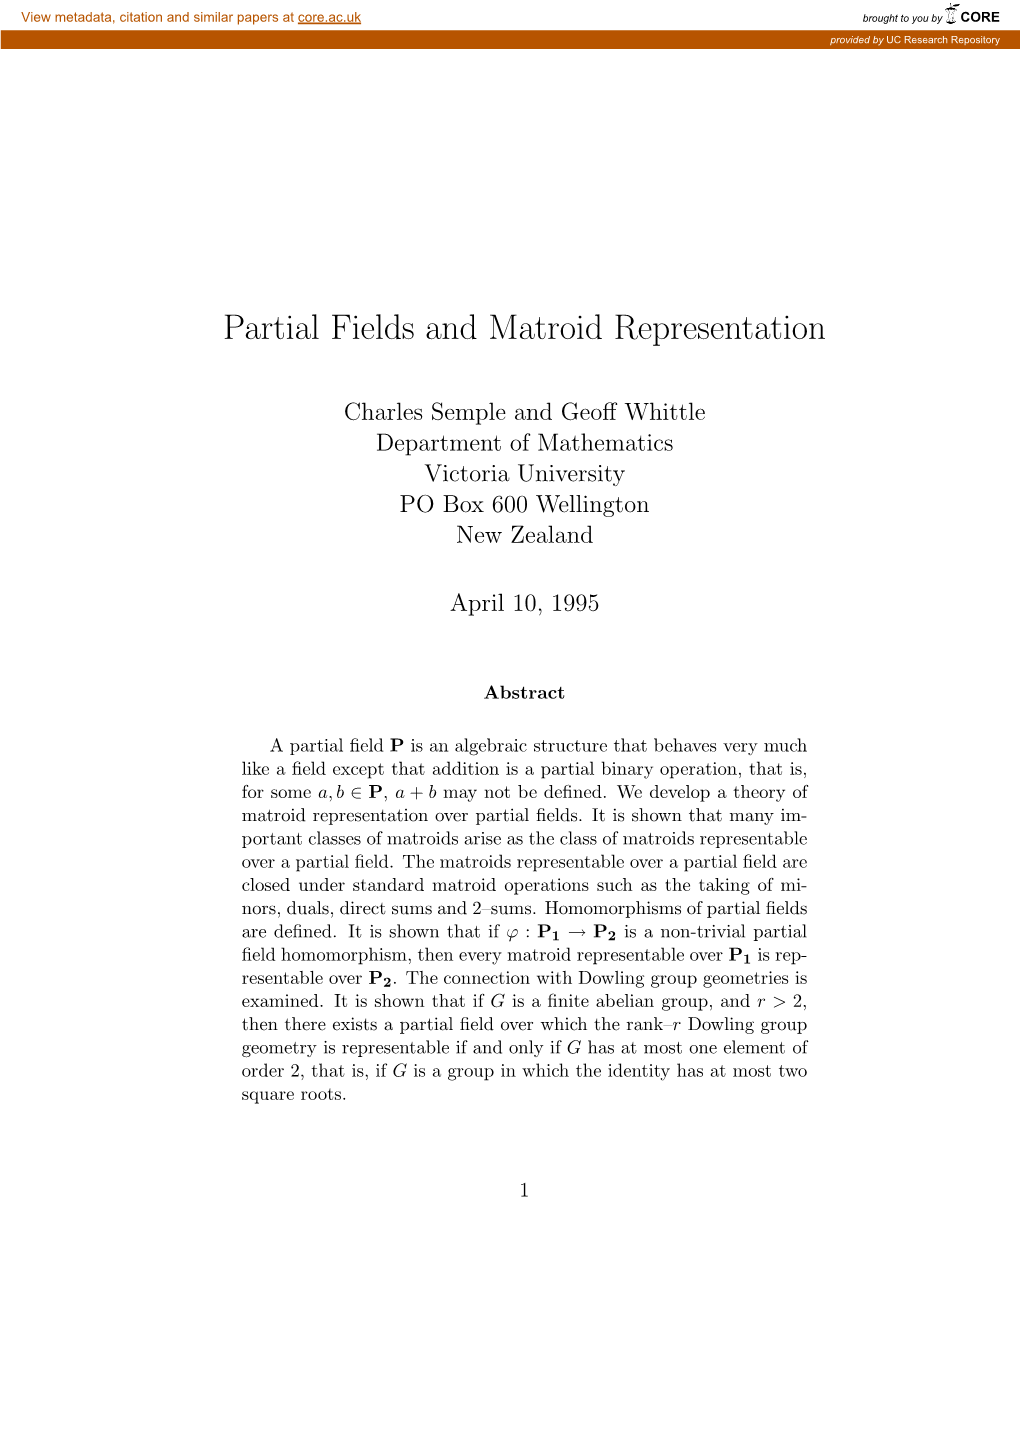 Partial Fields and Matroid Representation